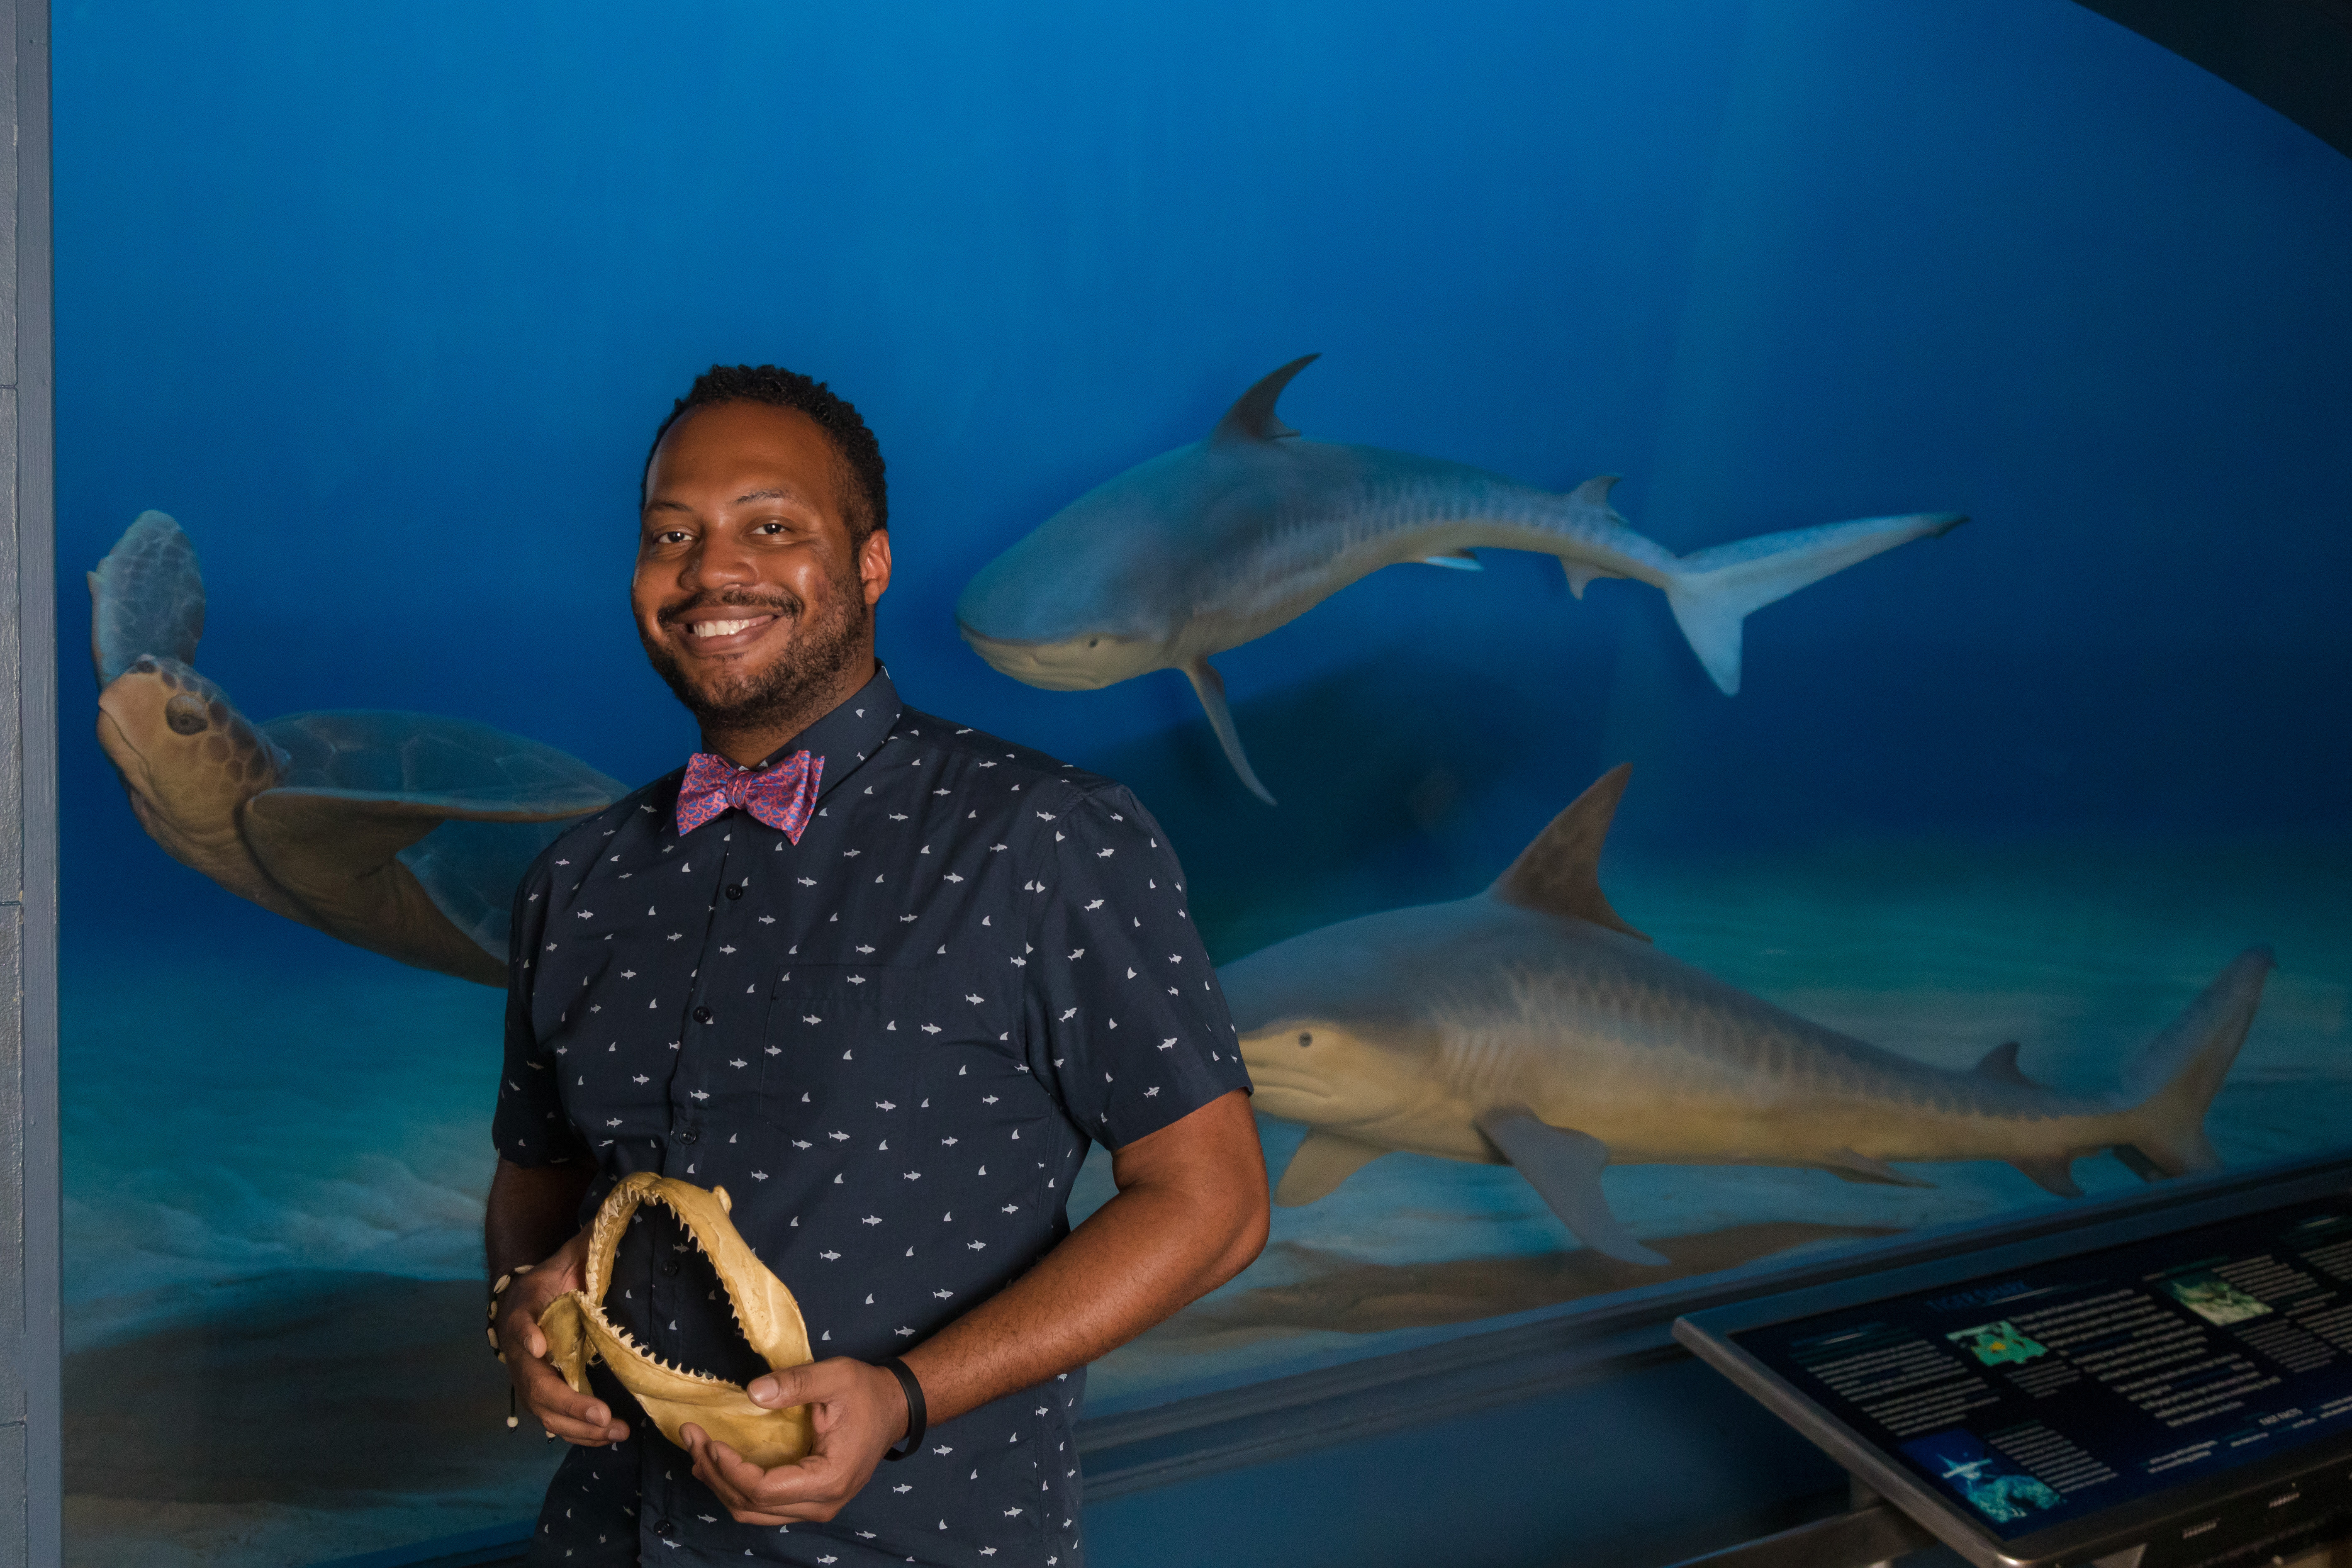 Nickcoles Martinez stands in front of a water-filled tank with sharks and a turtle.